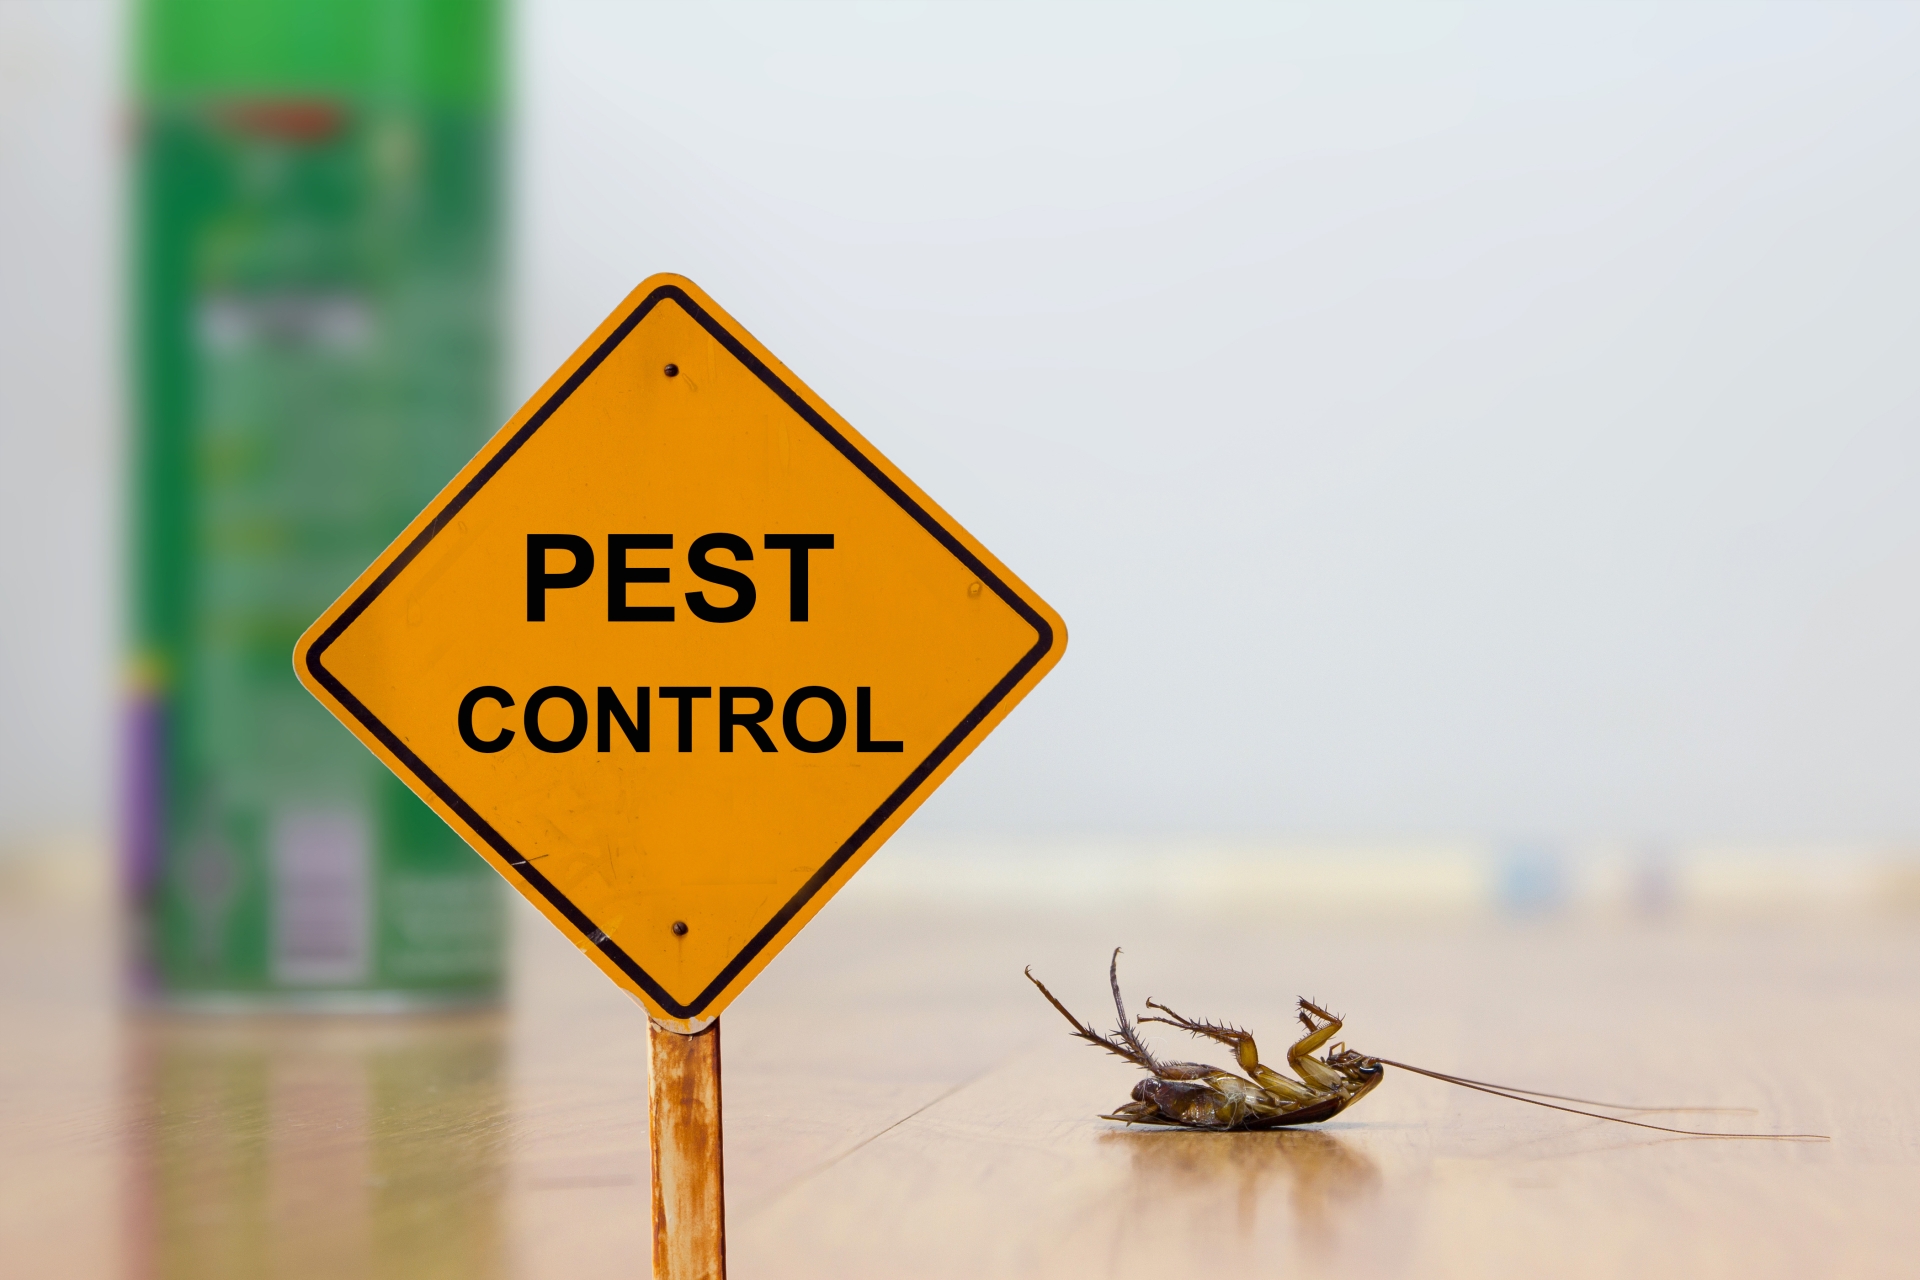 24 Hour Pest Control, Pest Control in Ilford, Loxford, IG1. Call Now 020 8166 9746